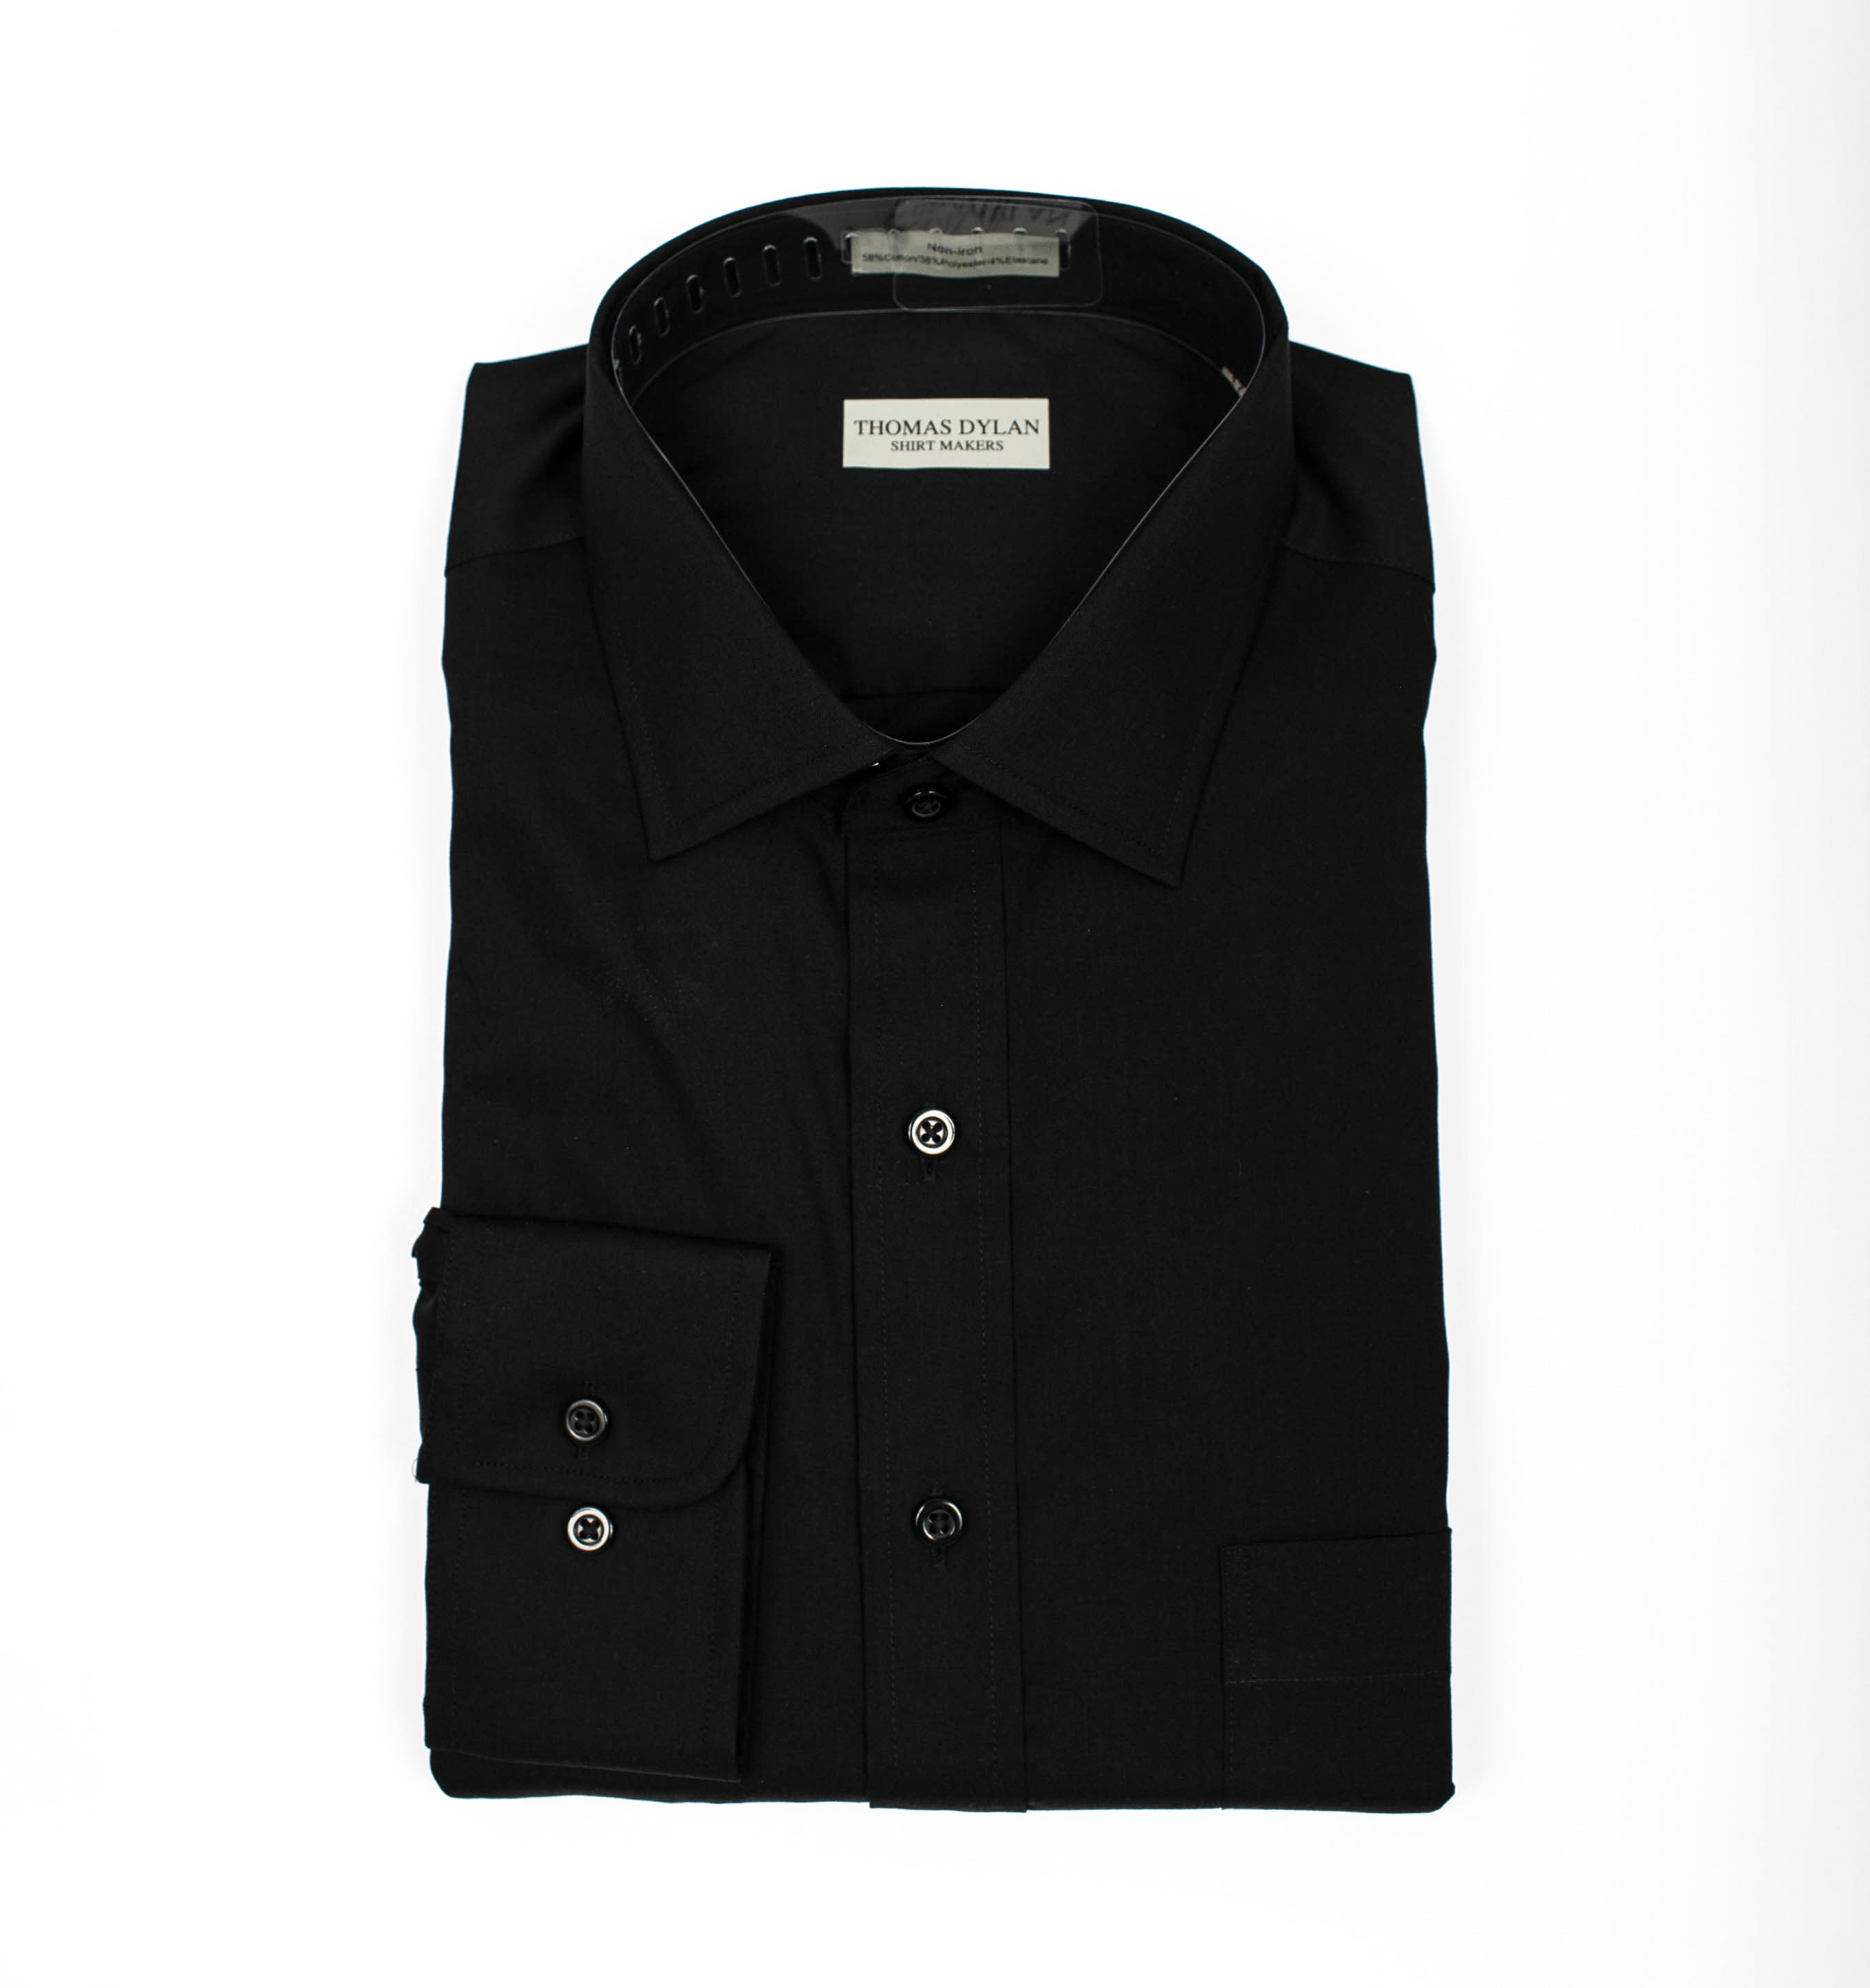 026 TF SC - Thomas Dylan Black Tailored Fit Spread Collar